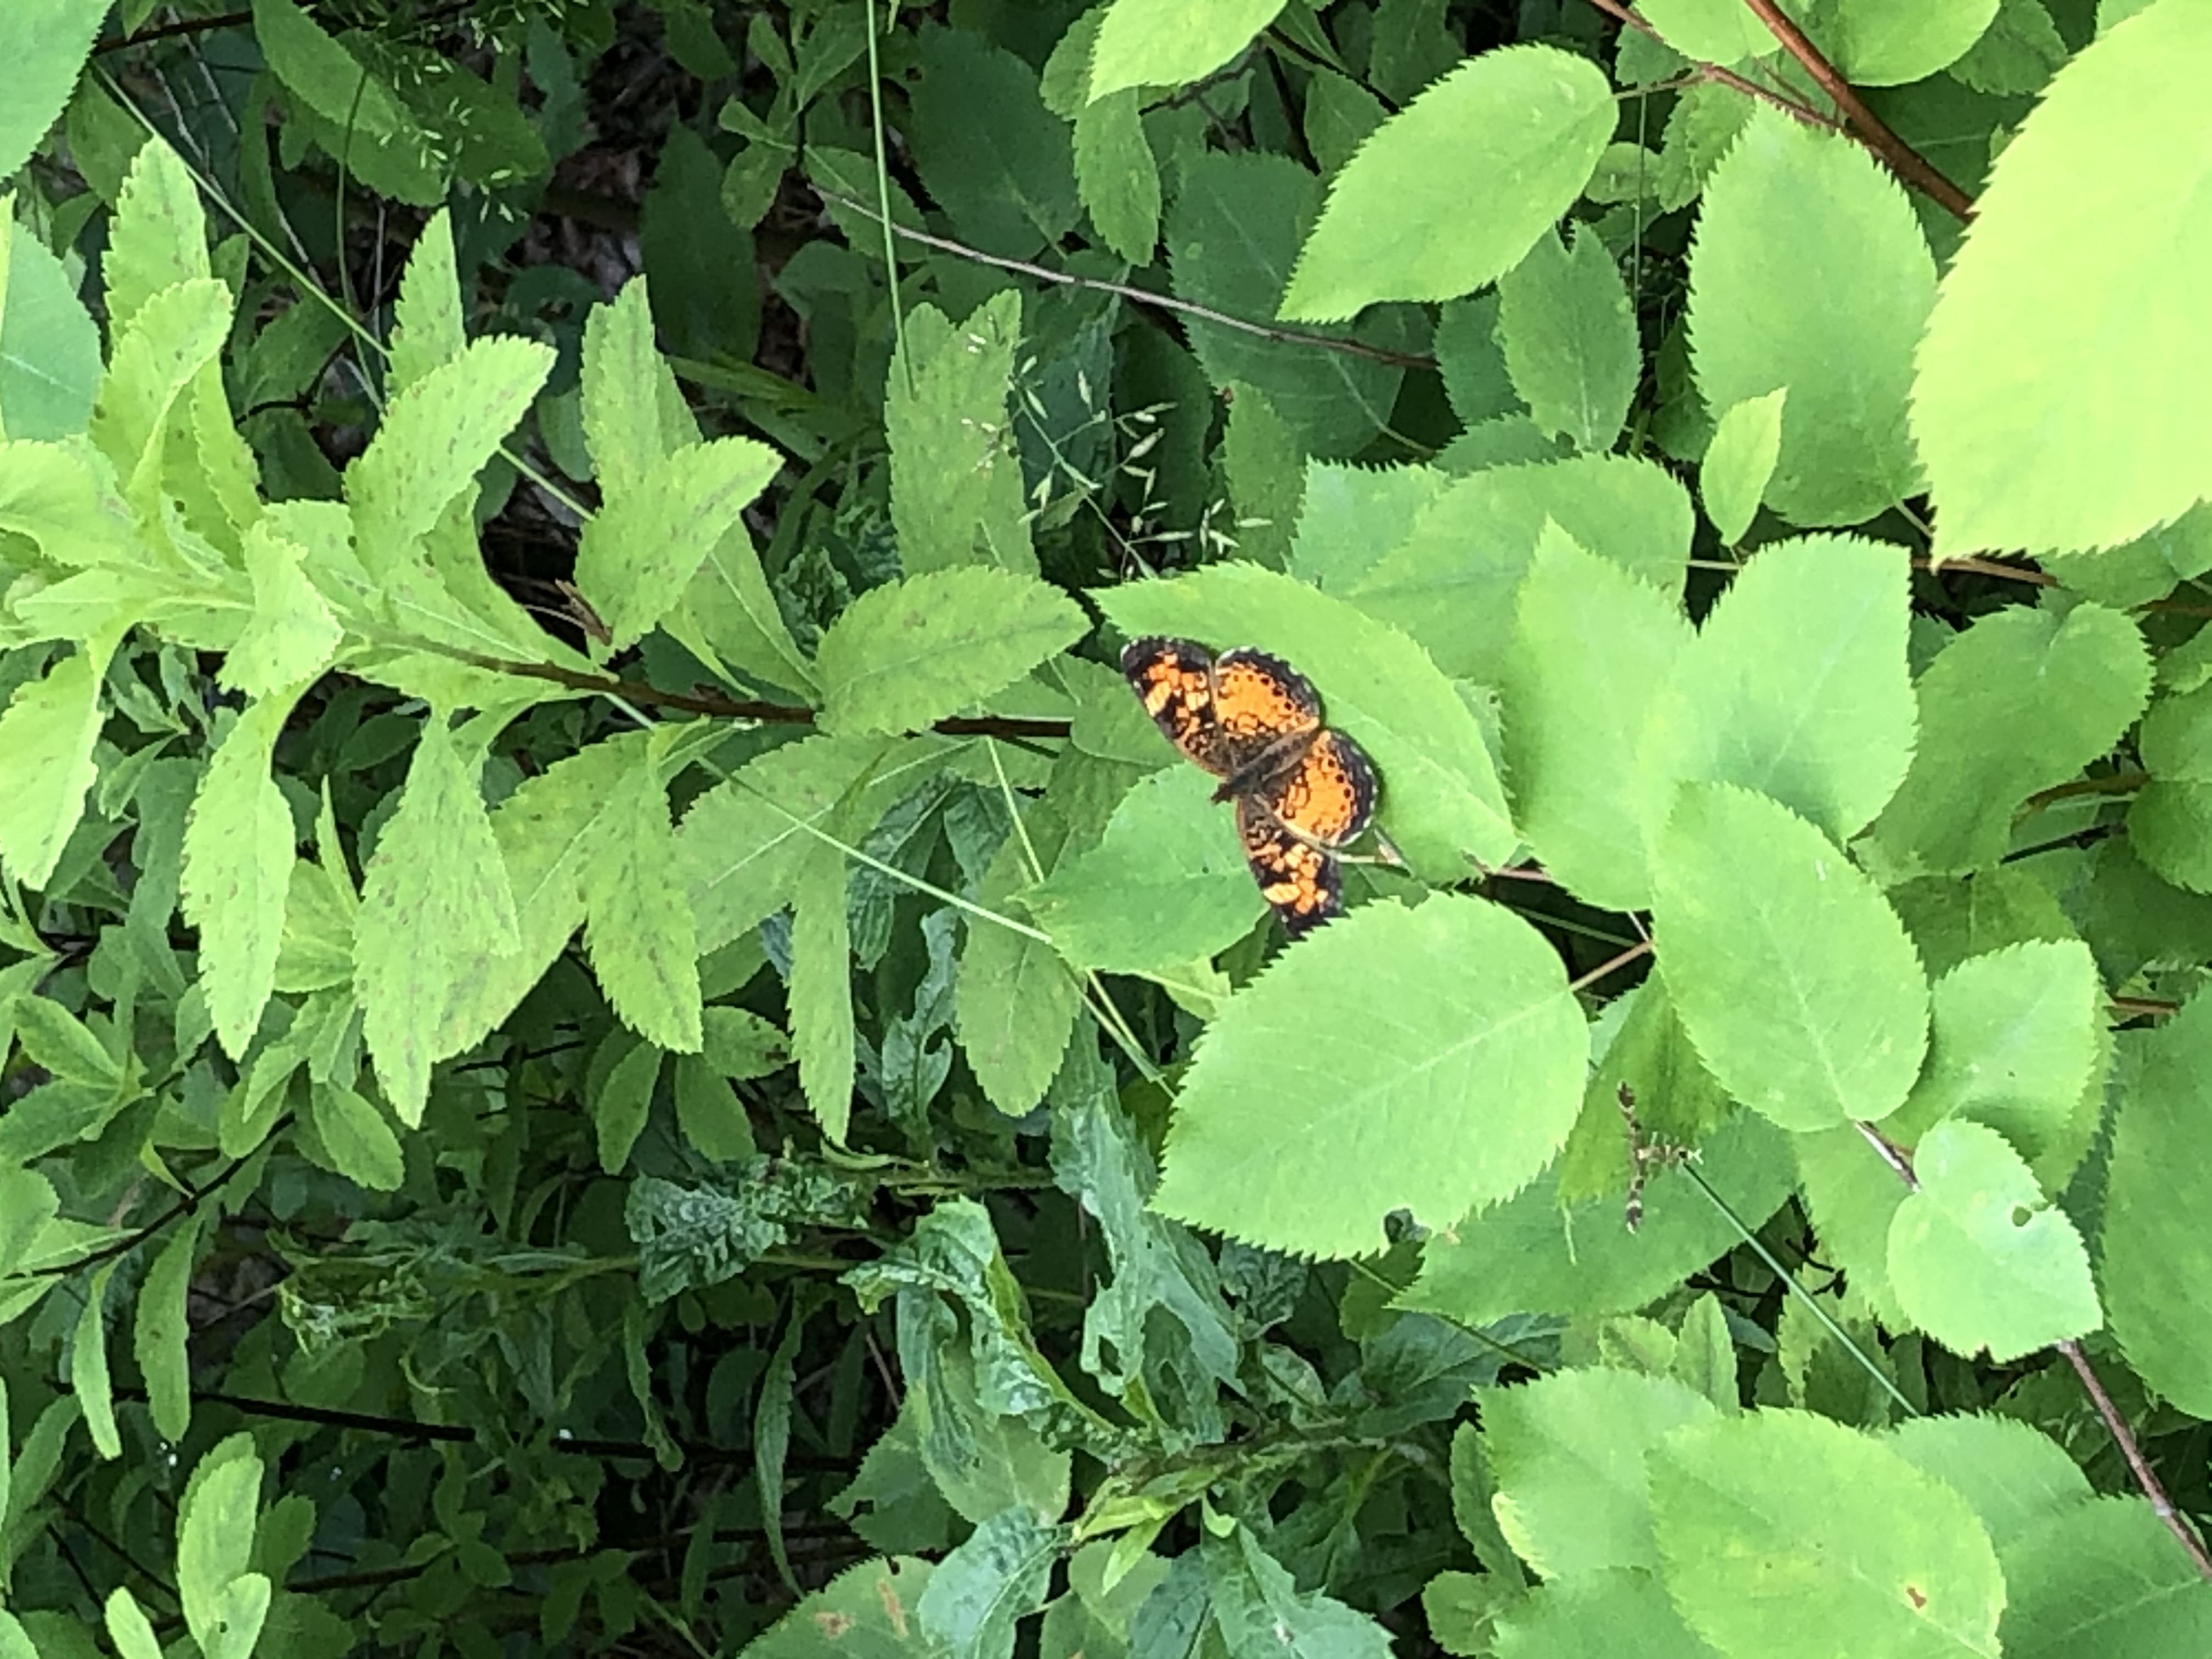 A butterfly on a leaf